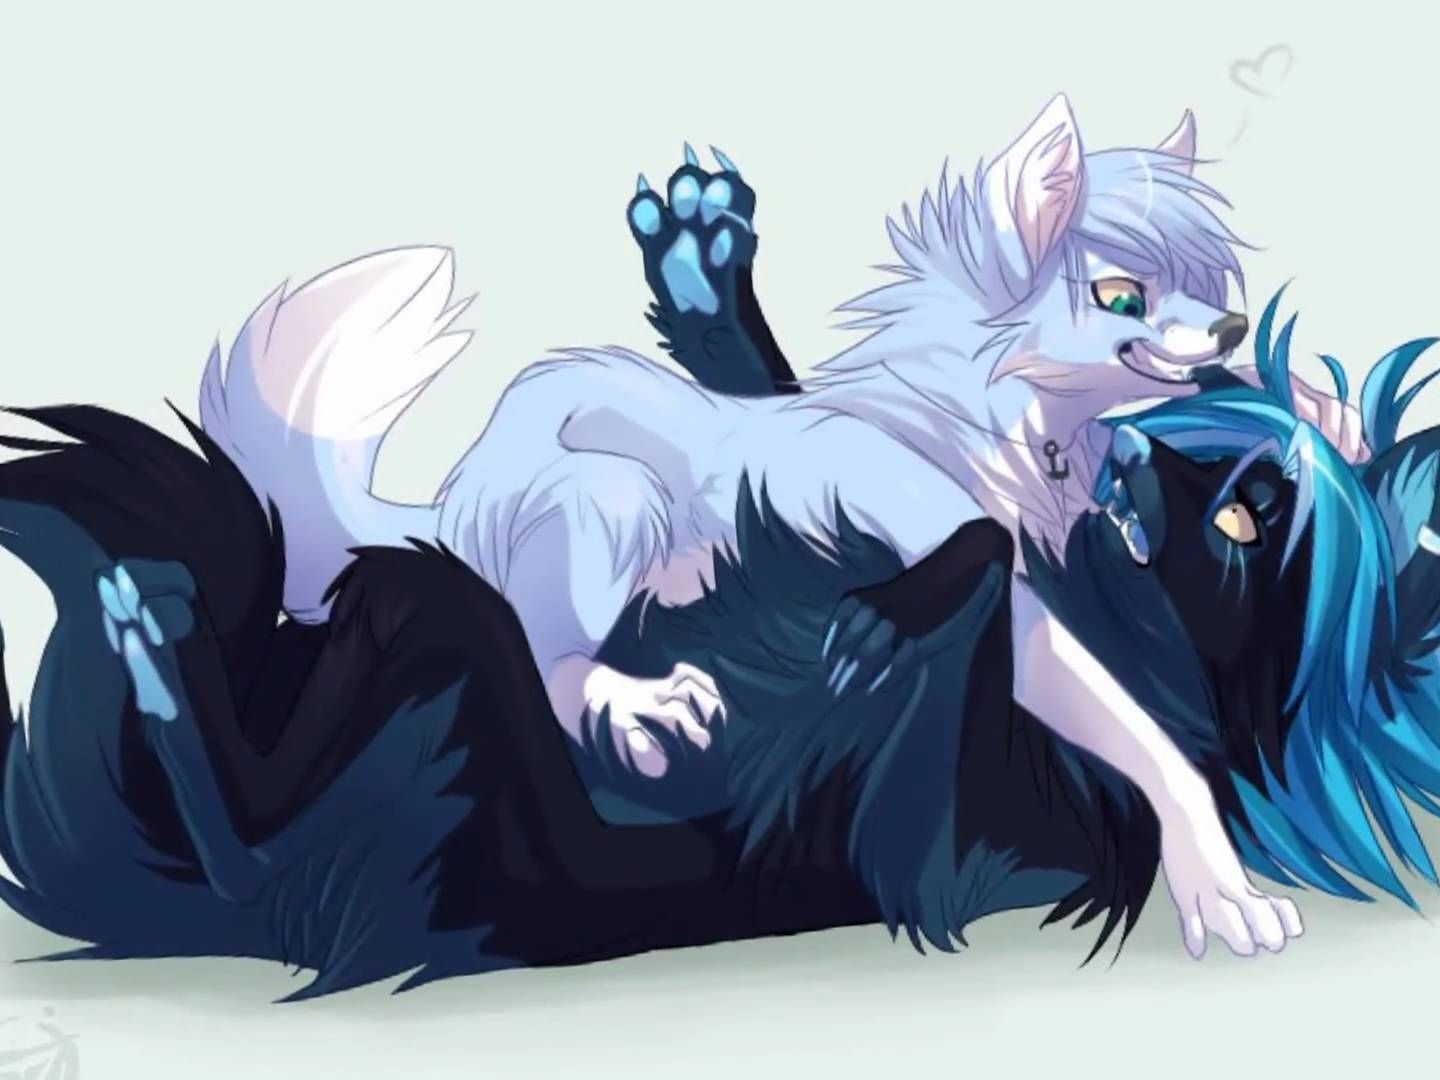 10 Best And Newest Pics Of Anime Wolves for Desktop with FULL HD 1080p (192...